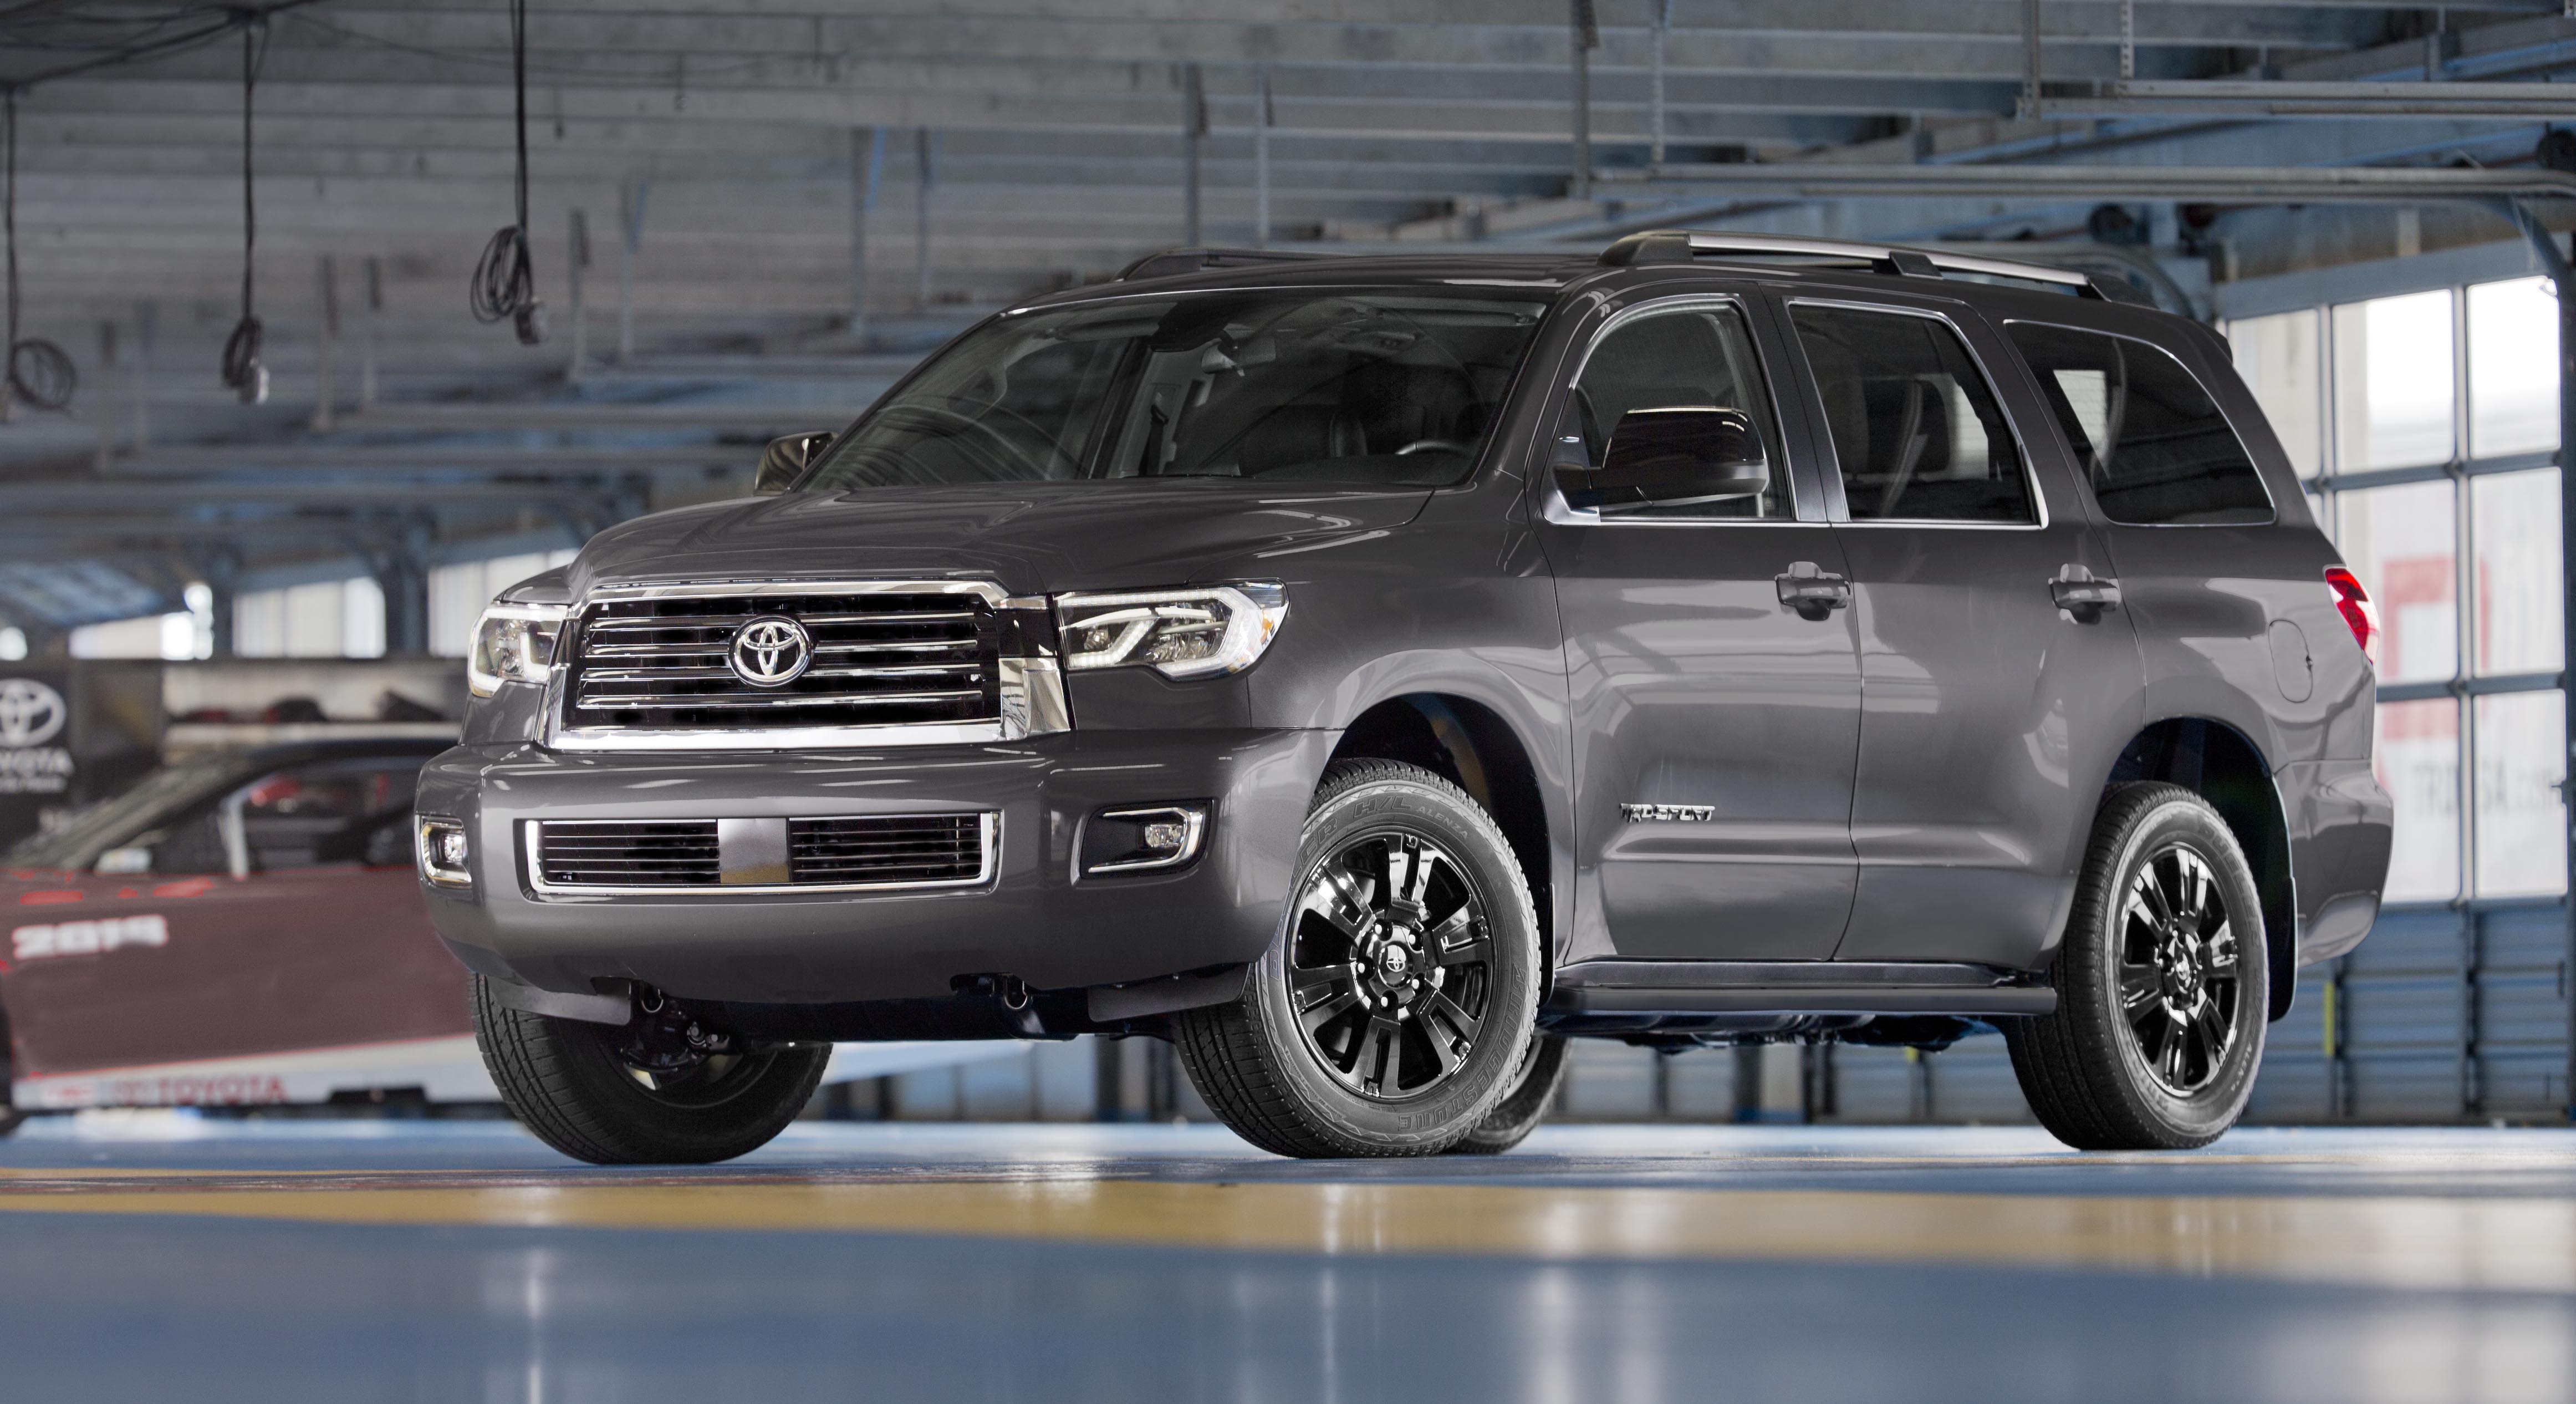 Toyota Sequoia mod restyling